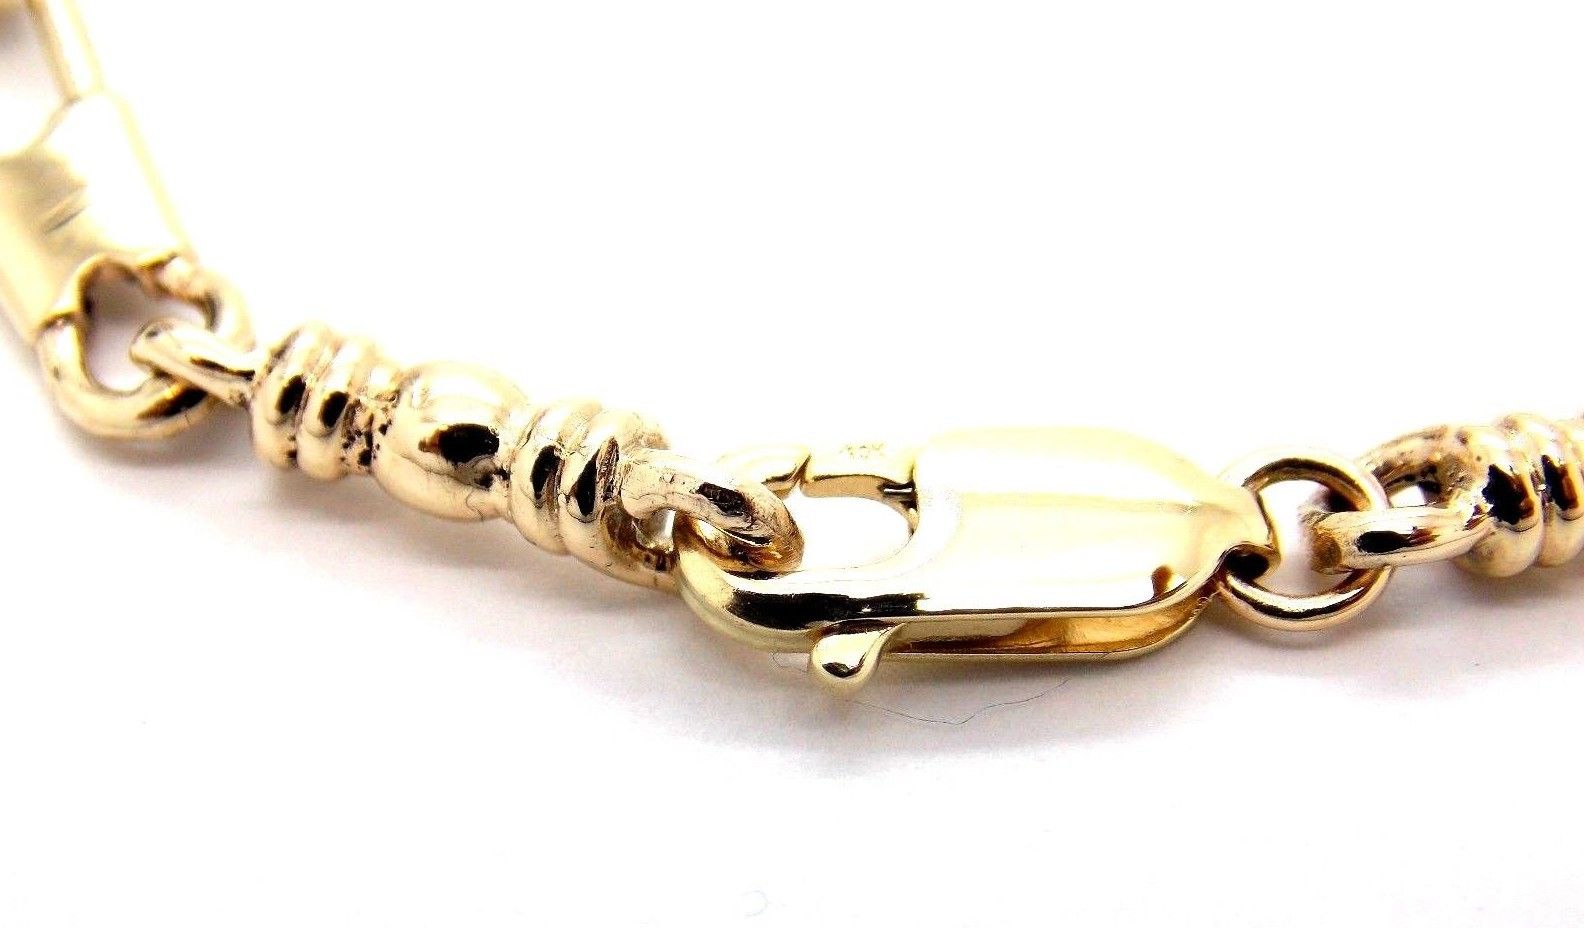 ACTS FISHERS OF MEN BRACELET MEDIUM LINK 14K SOLID YELLOW GOLD!! 